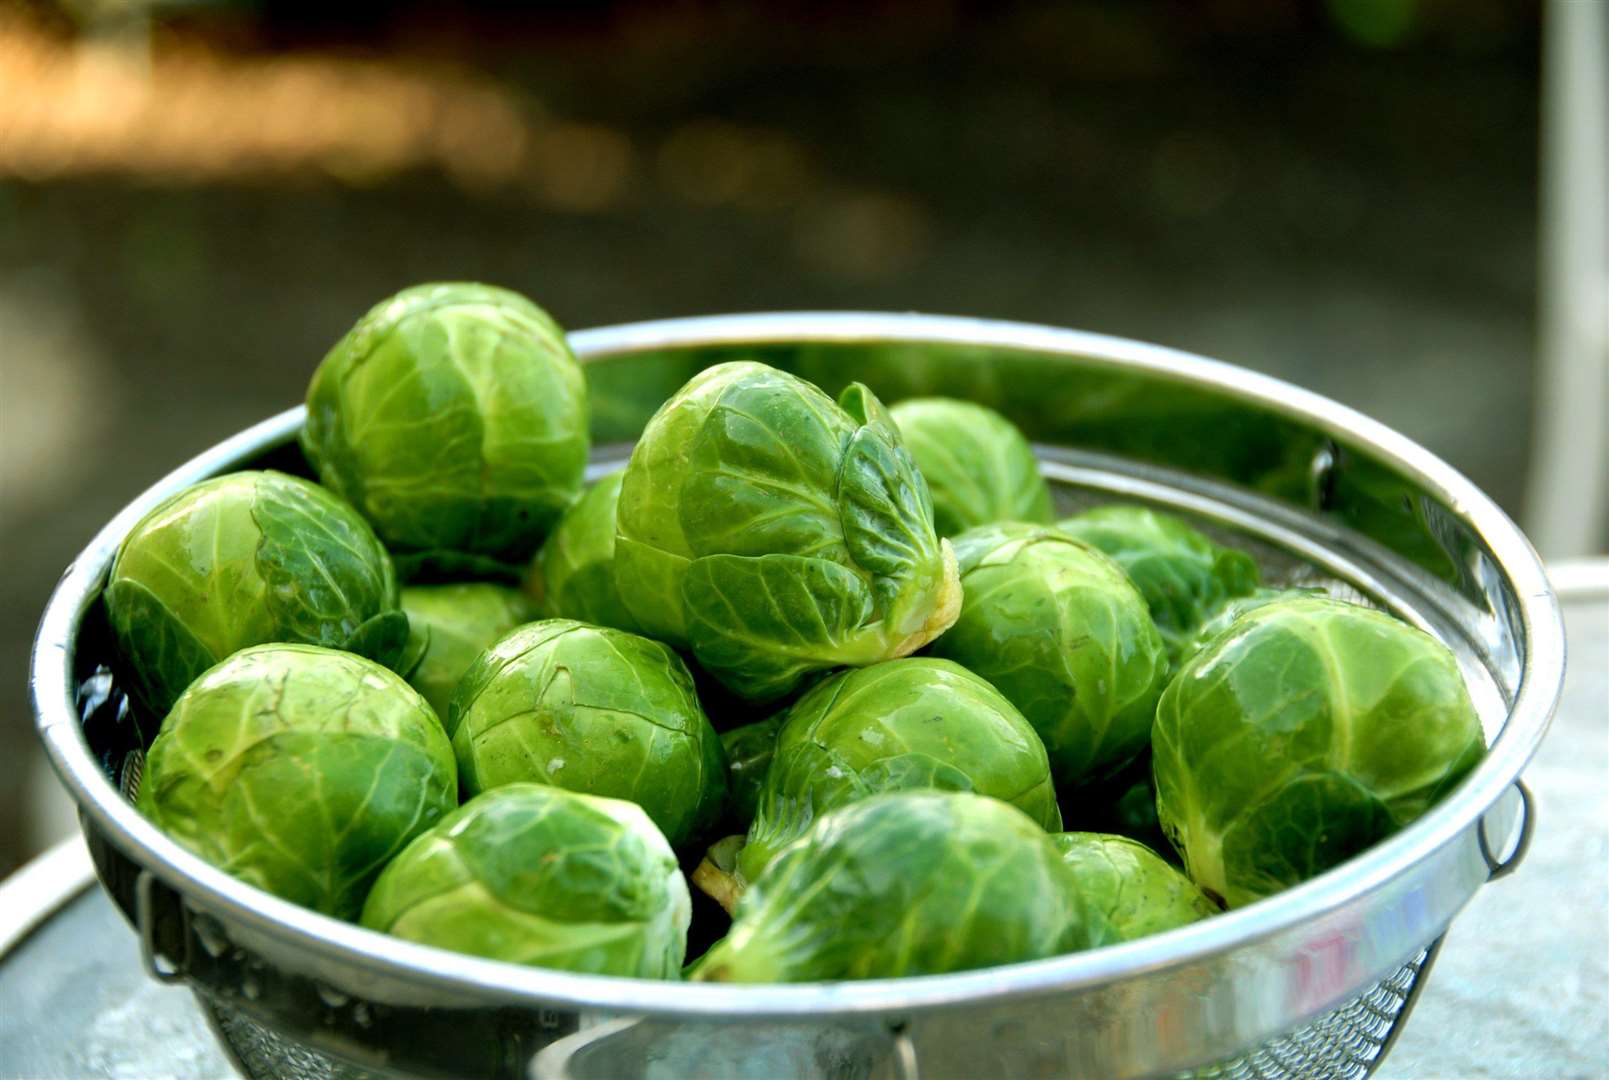 The current world record is 31 sprouts in one-minute